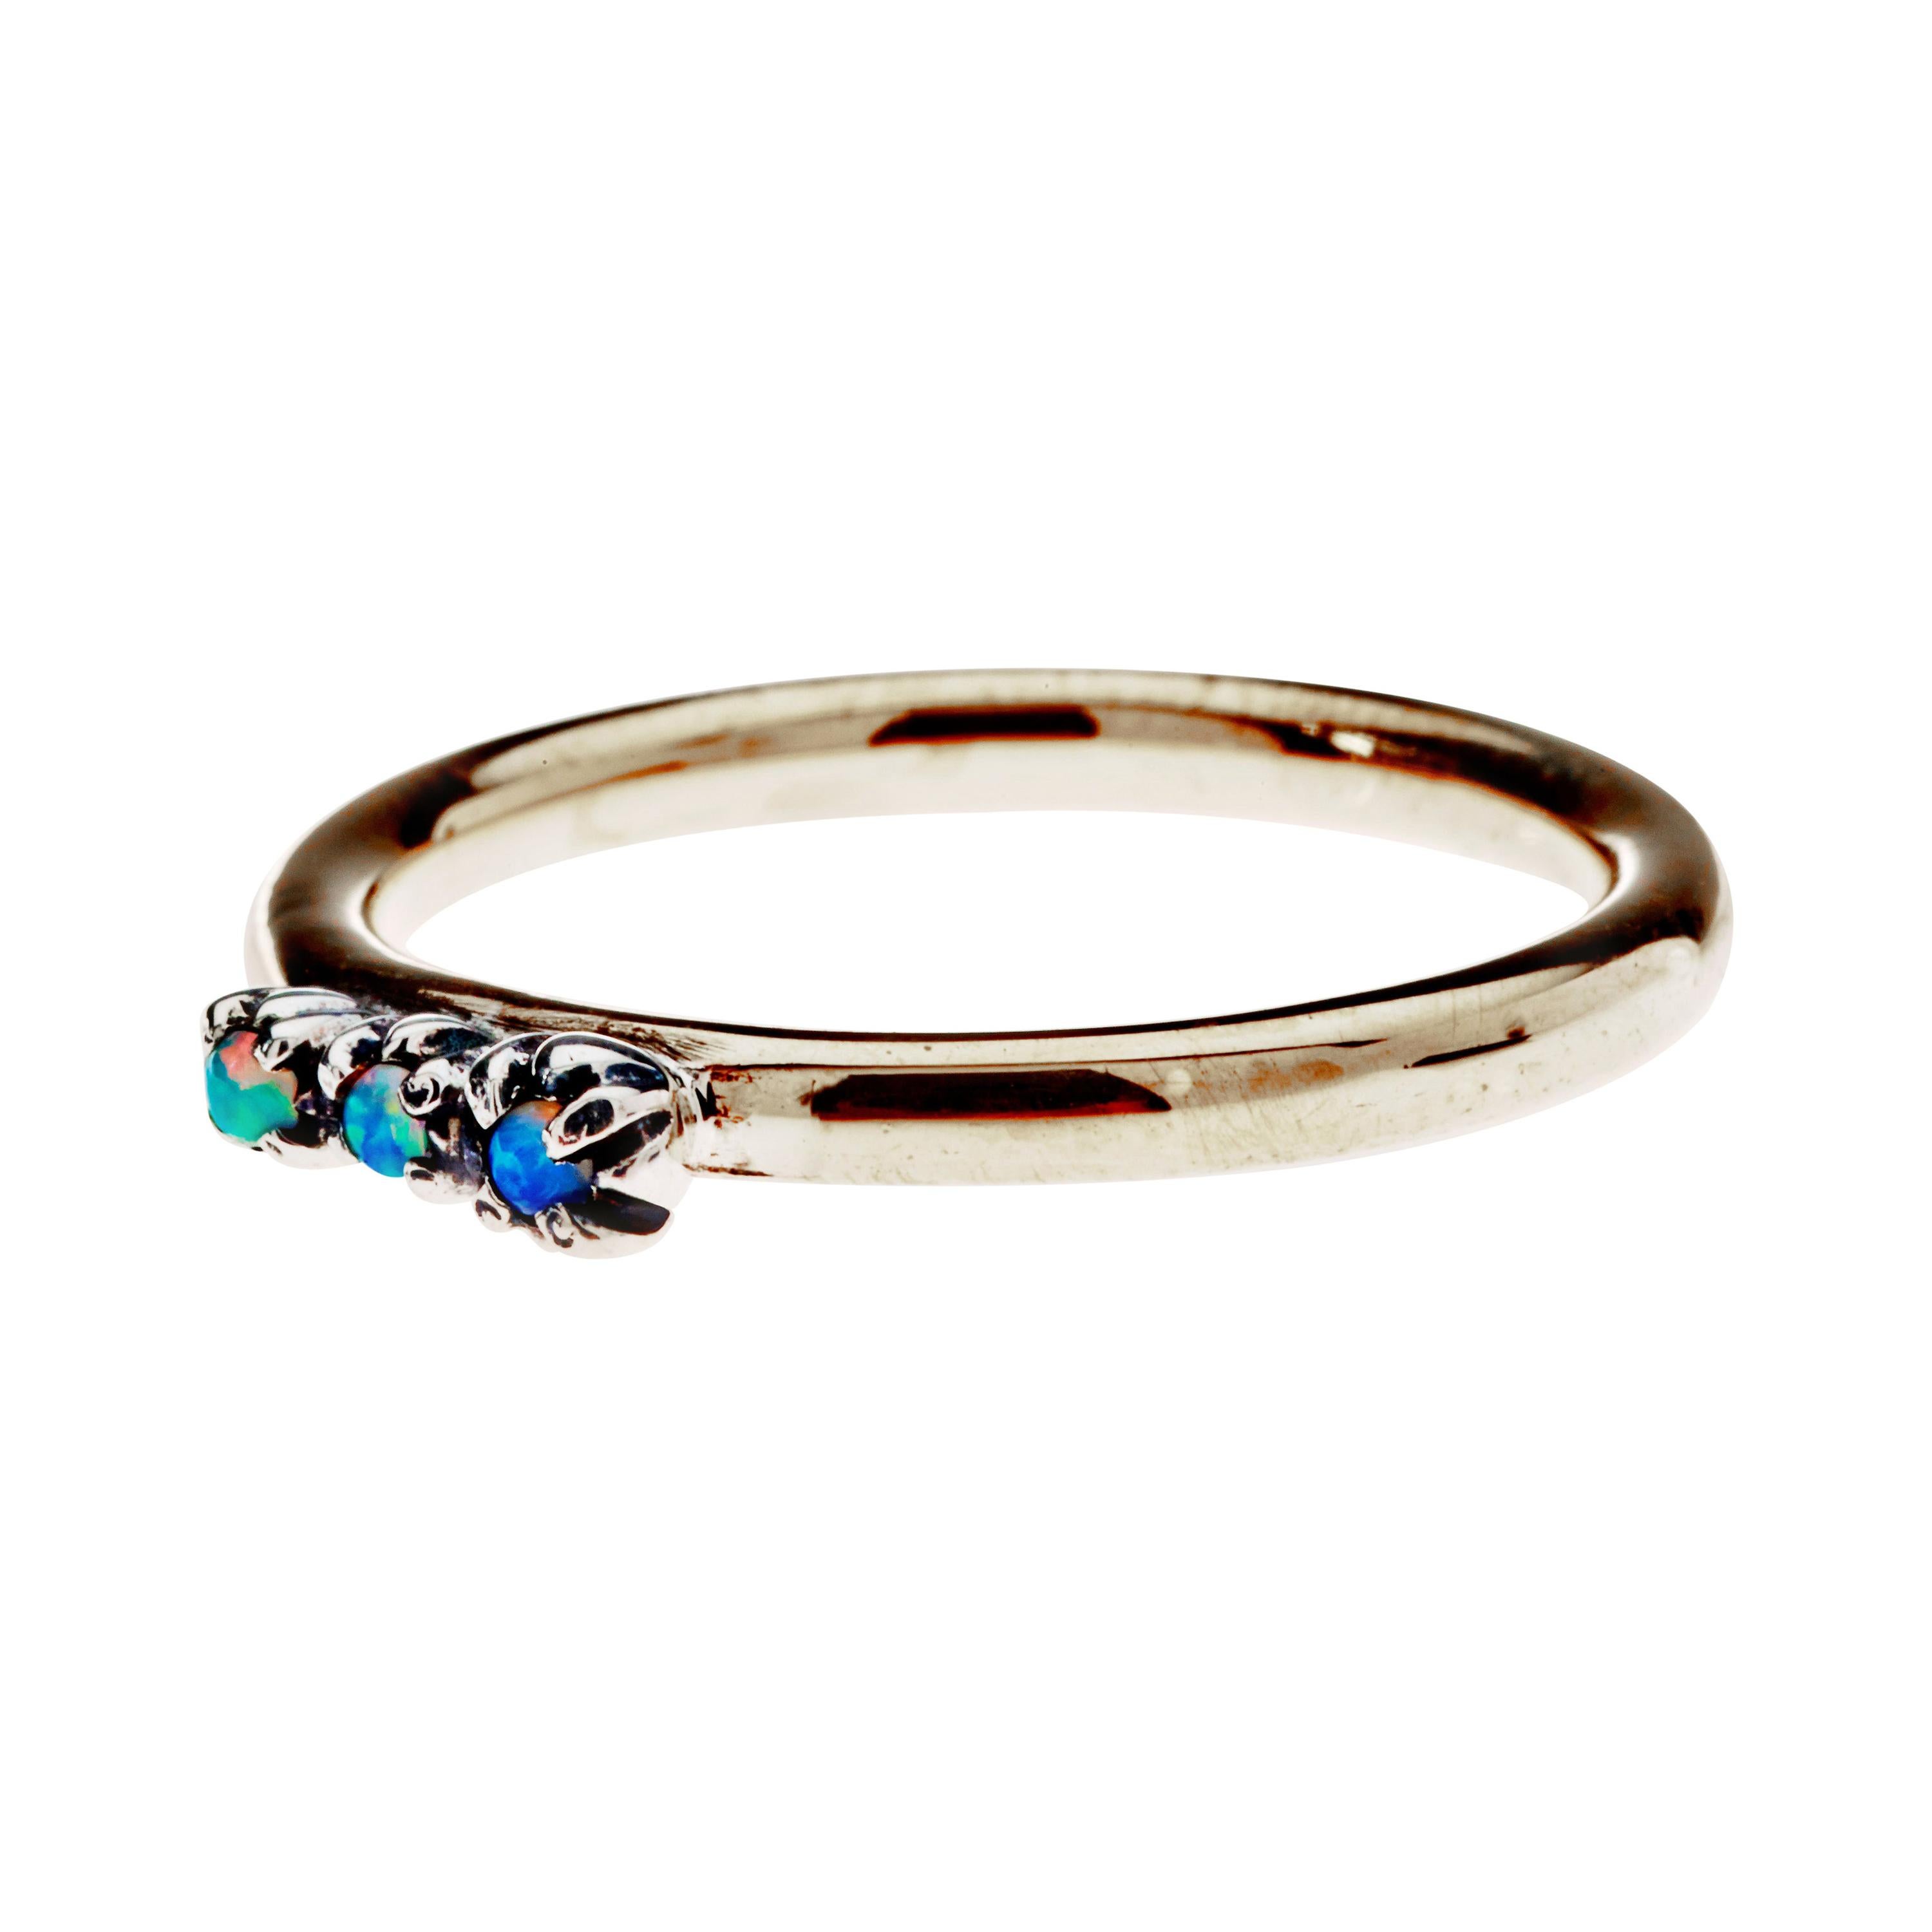 Opal Gold Ring Silver Prong Victorian Style Cocktail Ring J Dauphin For Sale